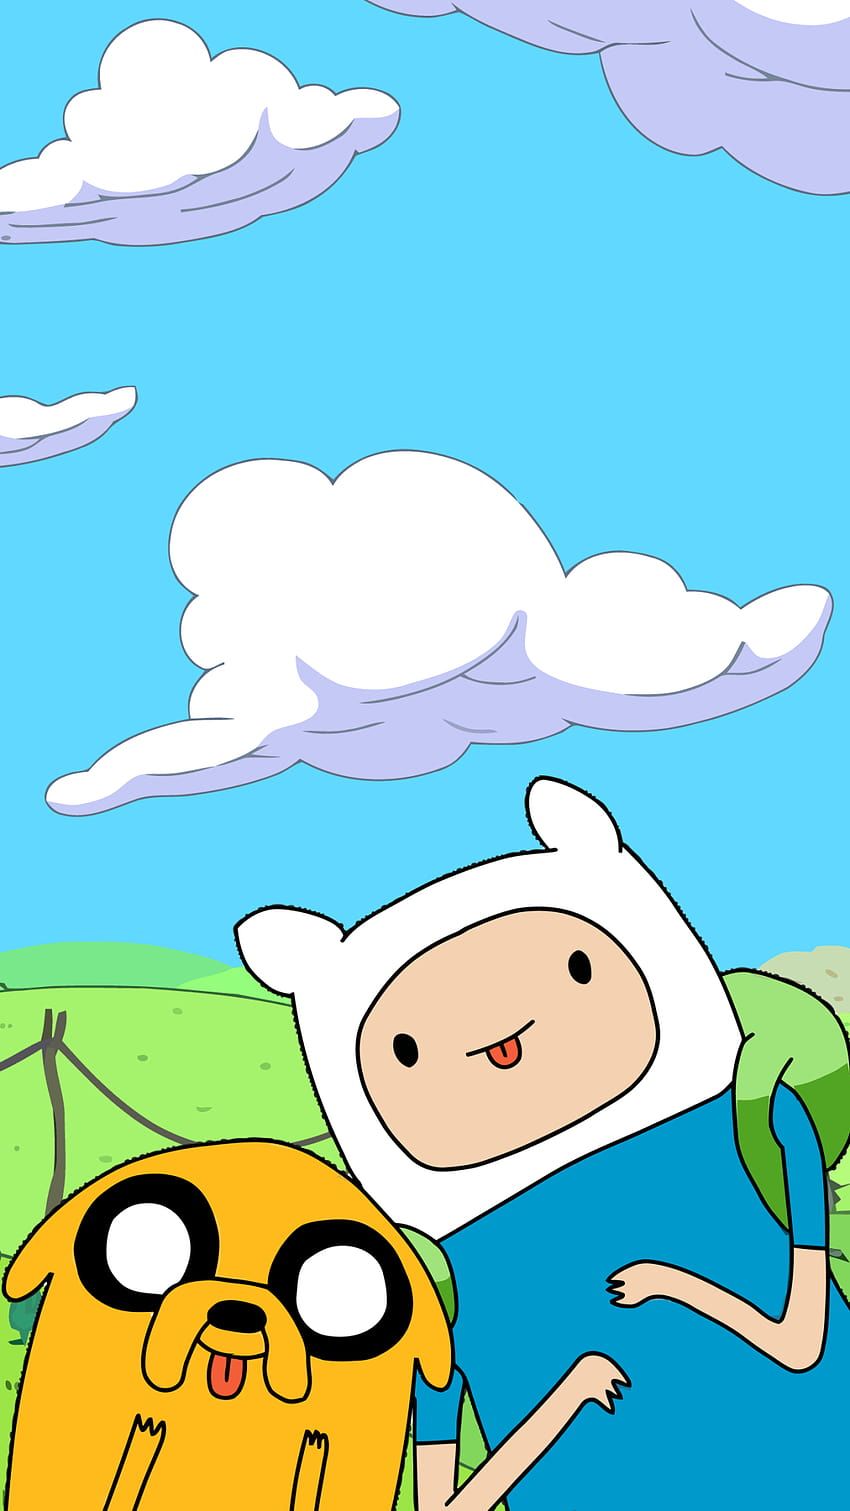 Adventure Time Finn and Jake wallpaper for iPhone and Android devices. - Adventure Time